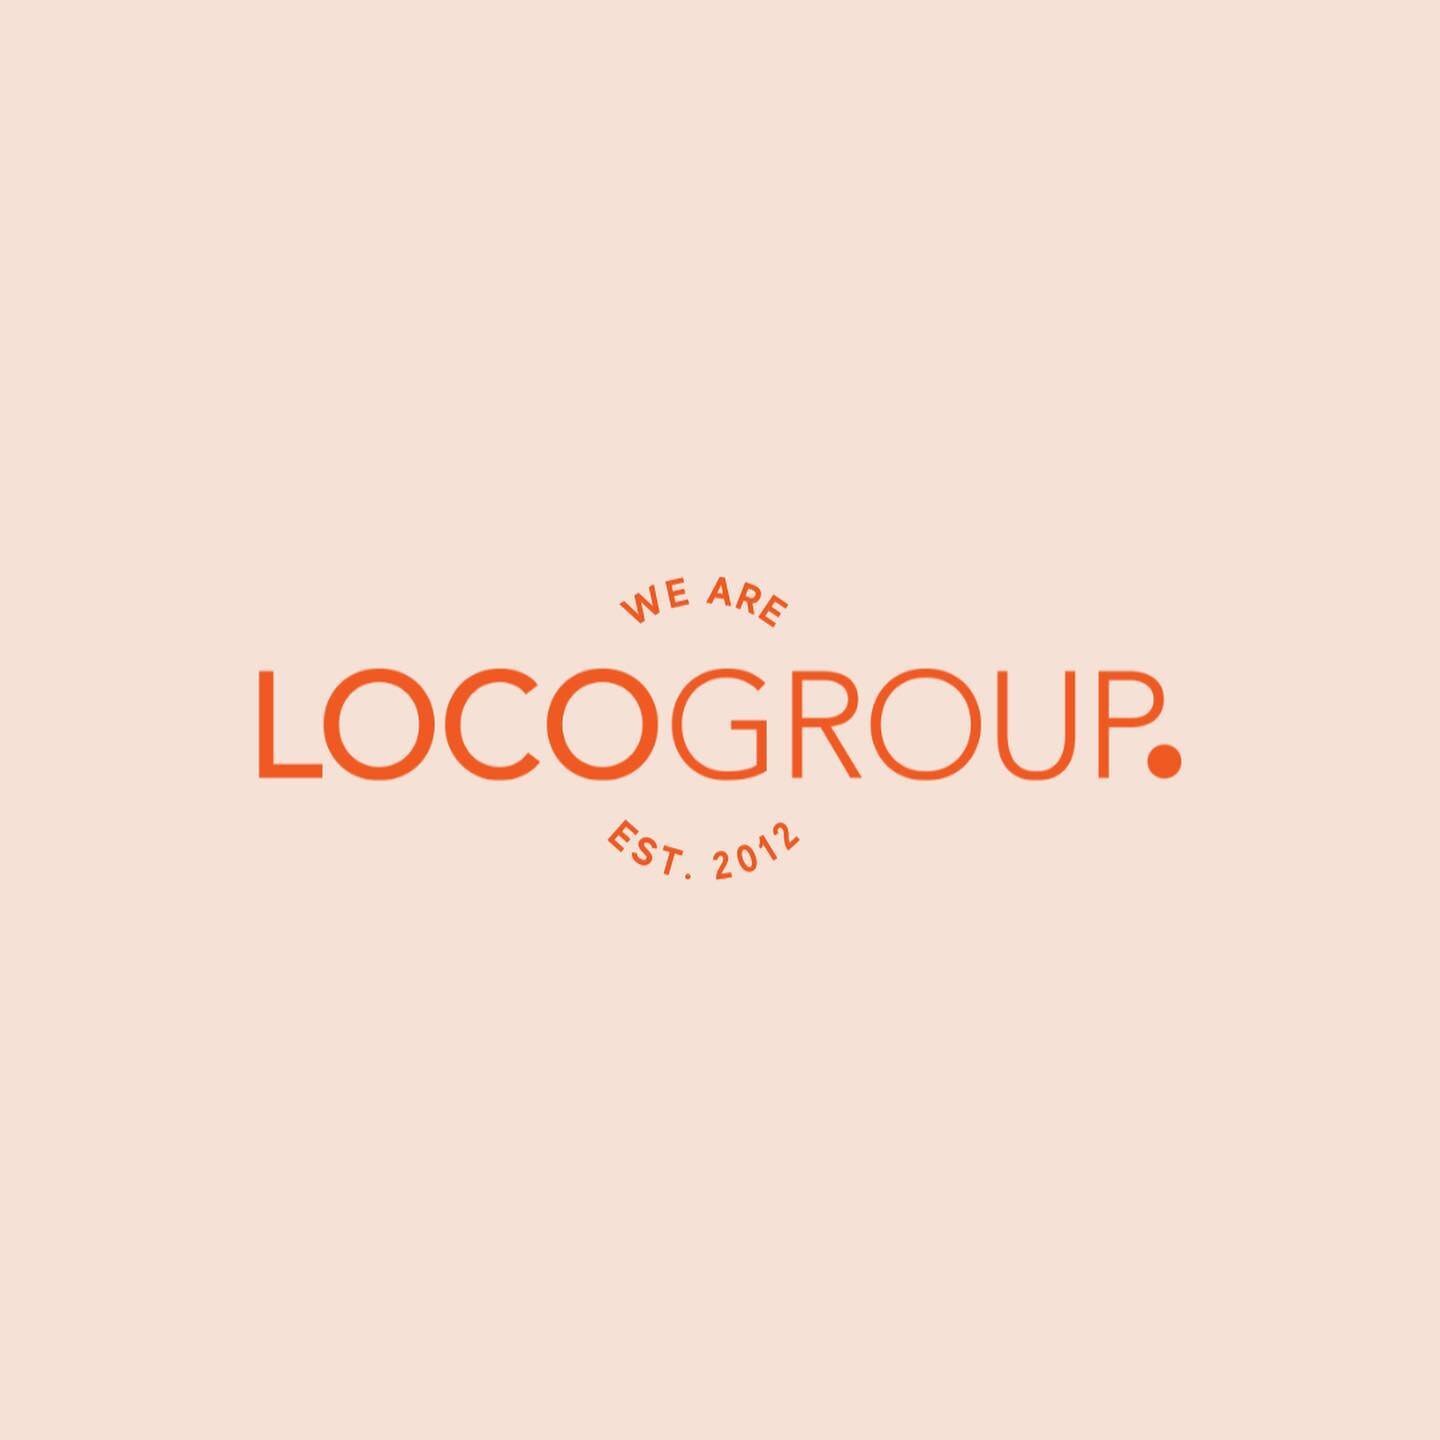 Exciting Update! Loco Group has gone through an e-transformation. 

Check out our new digital home at www.locogroup.com.au
Explore recent projects for event inspiration and download our services deck.

Ready to elevate your ideas? Contact us at hello